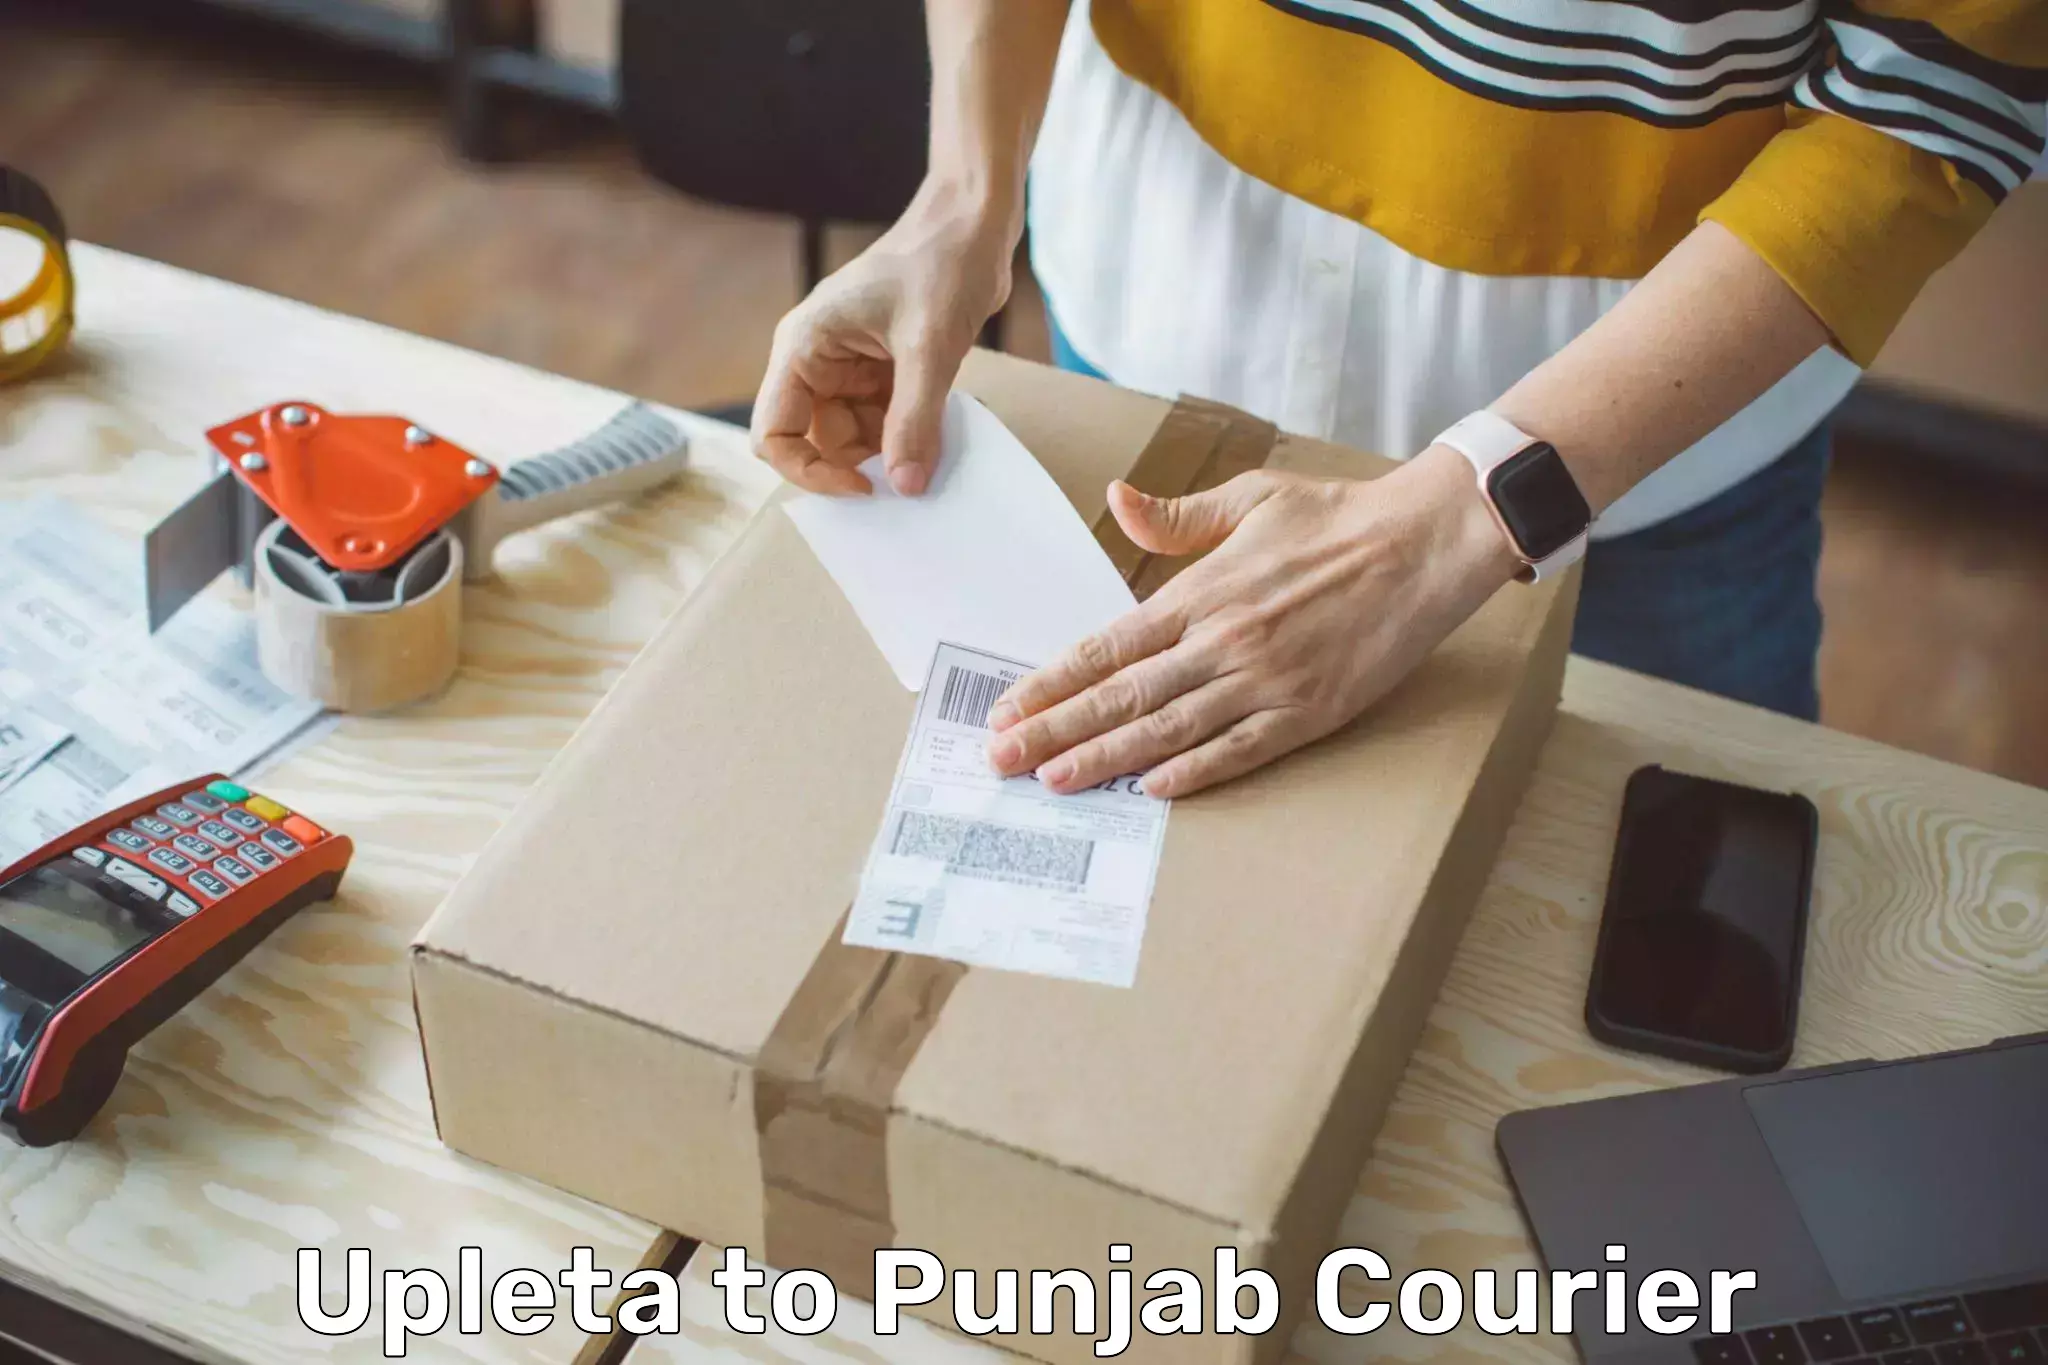 Efficient courier operations Upleta to Punjab